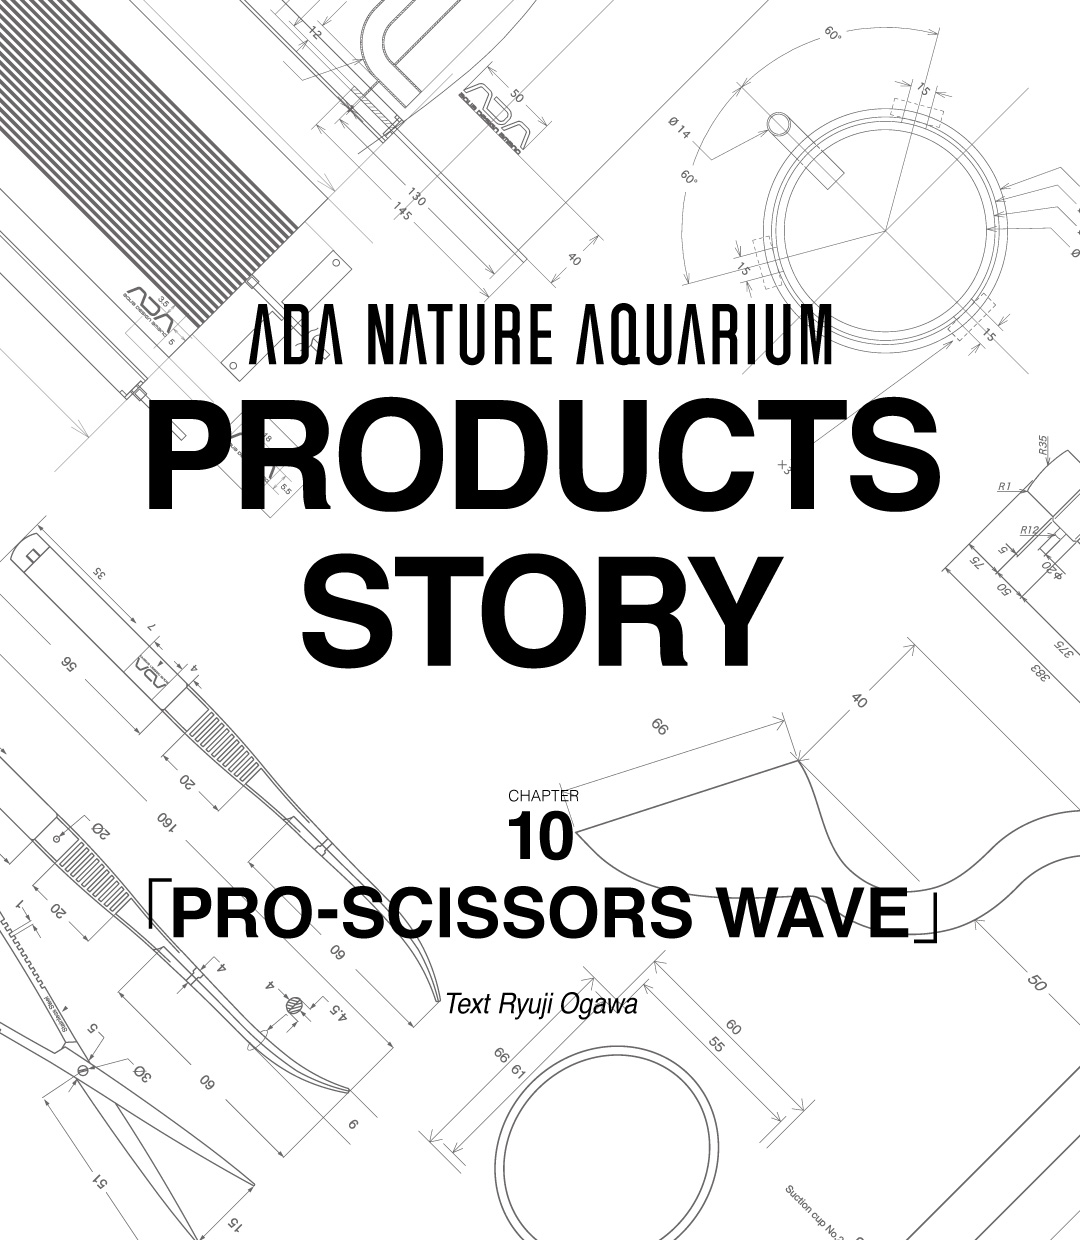 NA PRODUCTS STORY #10 PRO-SCISSORS WAVE